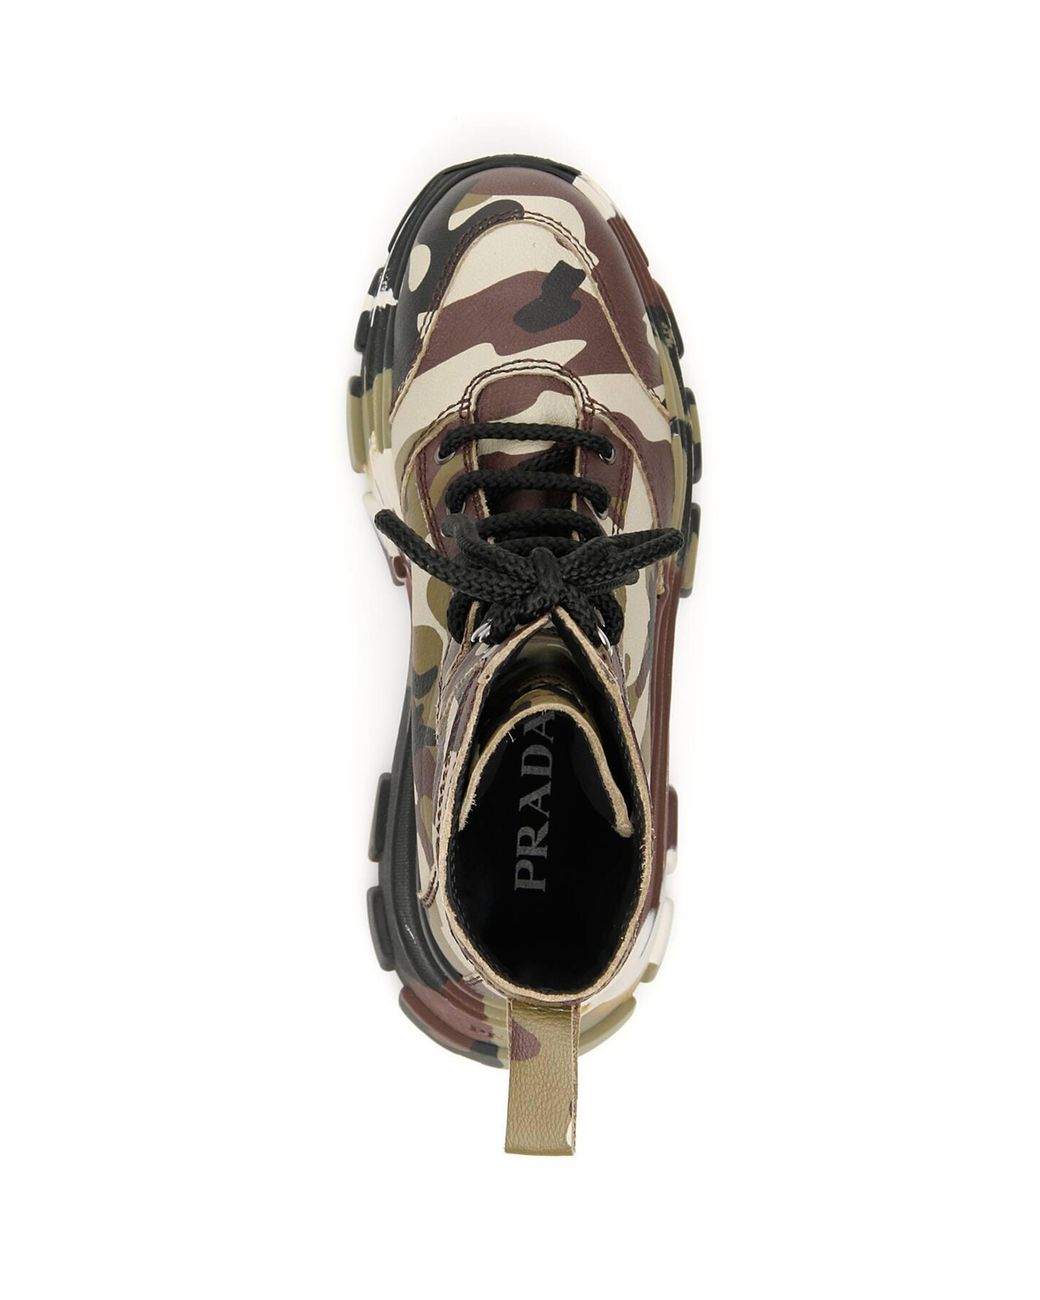 Prada Camouflage Combat Boots in Green | Lyst